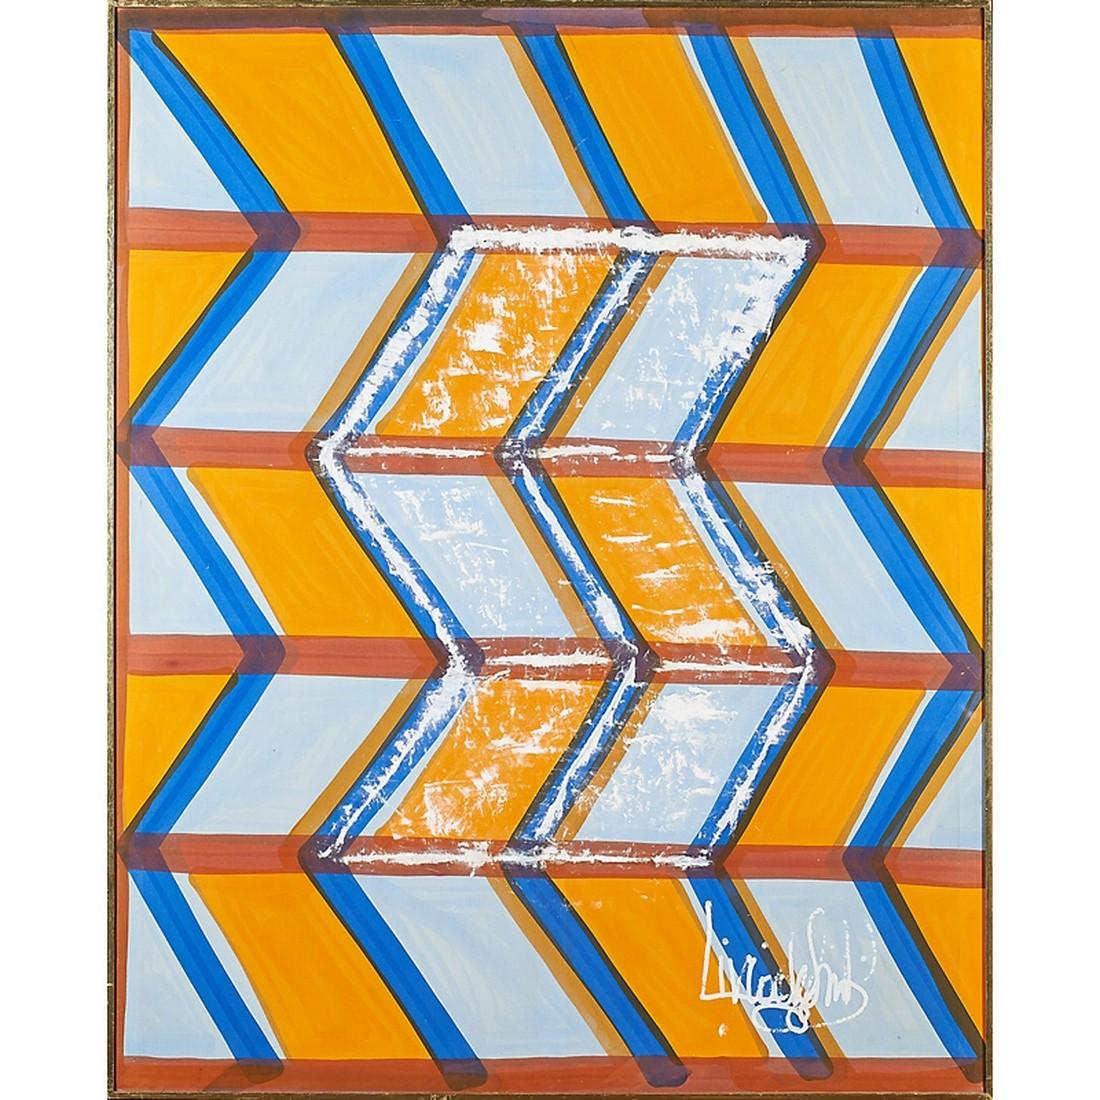 Large, Signed Livio de Simone original hand painted geometric shaped pattern on cotton fabric. Made in Italy.
Livio de Simone, designer-artist and creator of extraordinary tailoring elaborations, entered the history of haute couture next to Emilio